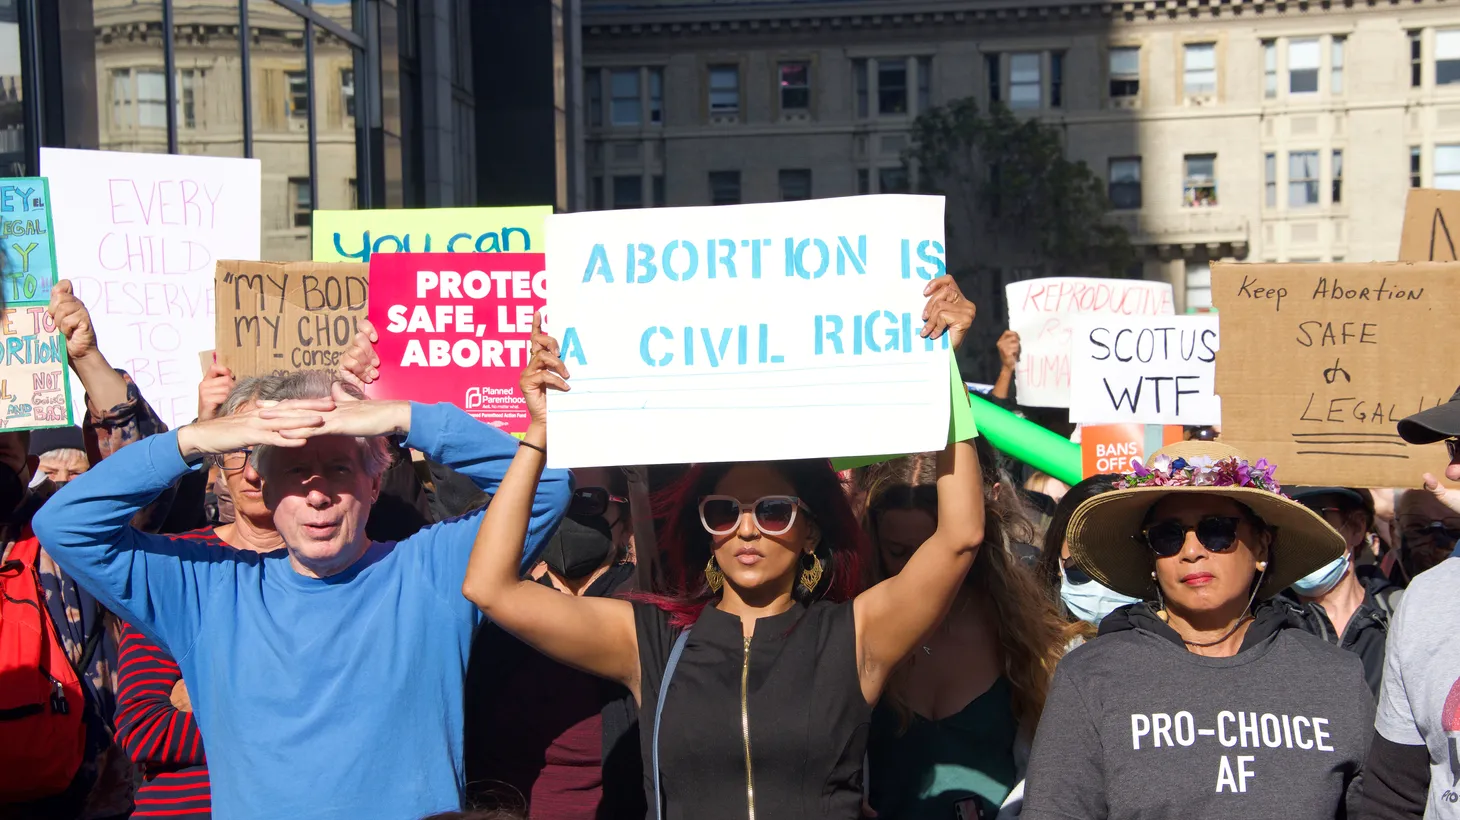 San Francisco, CA - May 3, 2022: Participants at Women’s Rights Protest after SCOTUS leak, plan to overturn Roe v Wade.